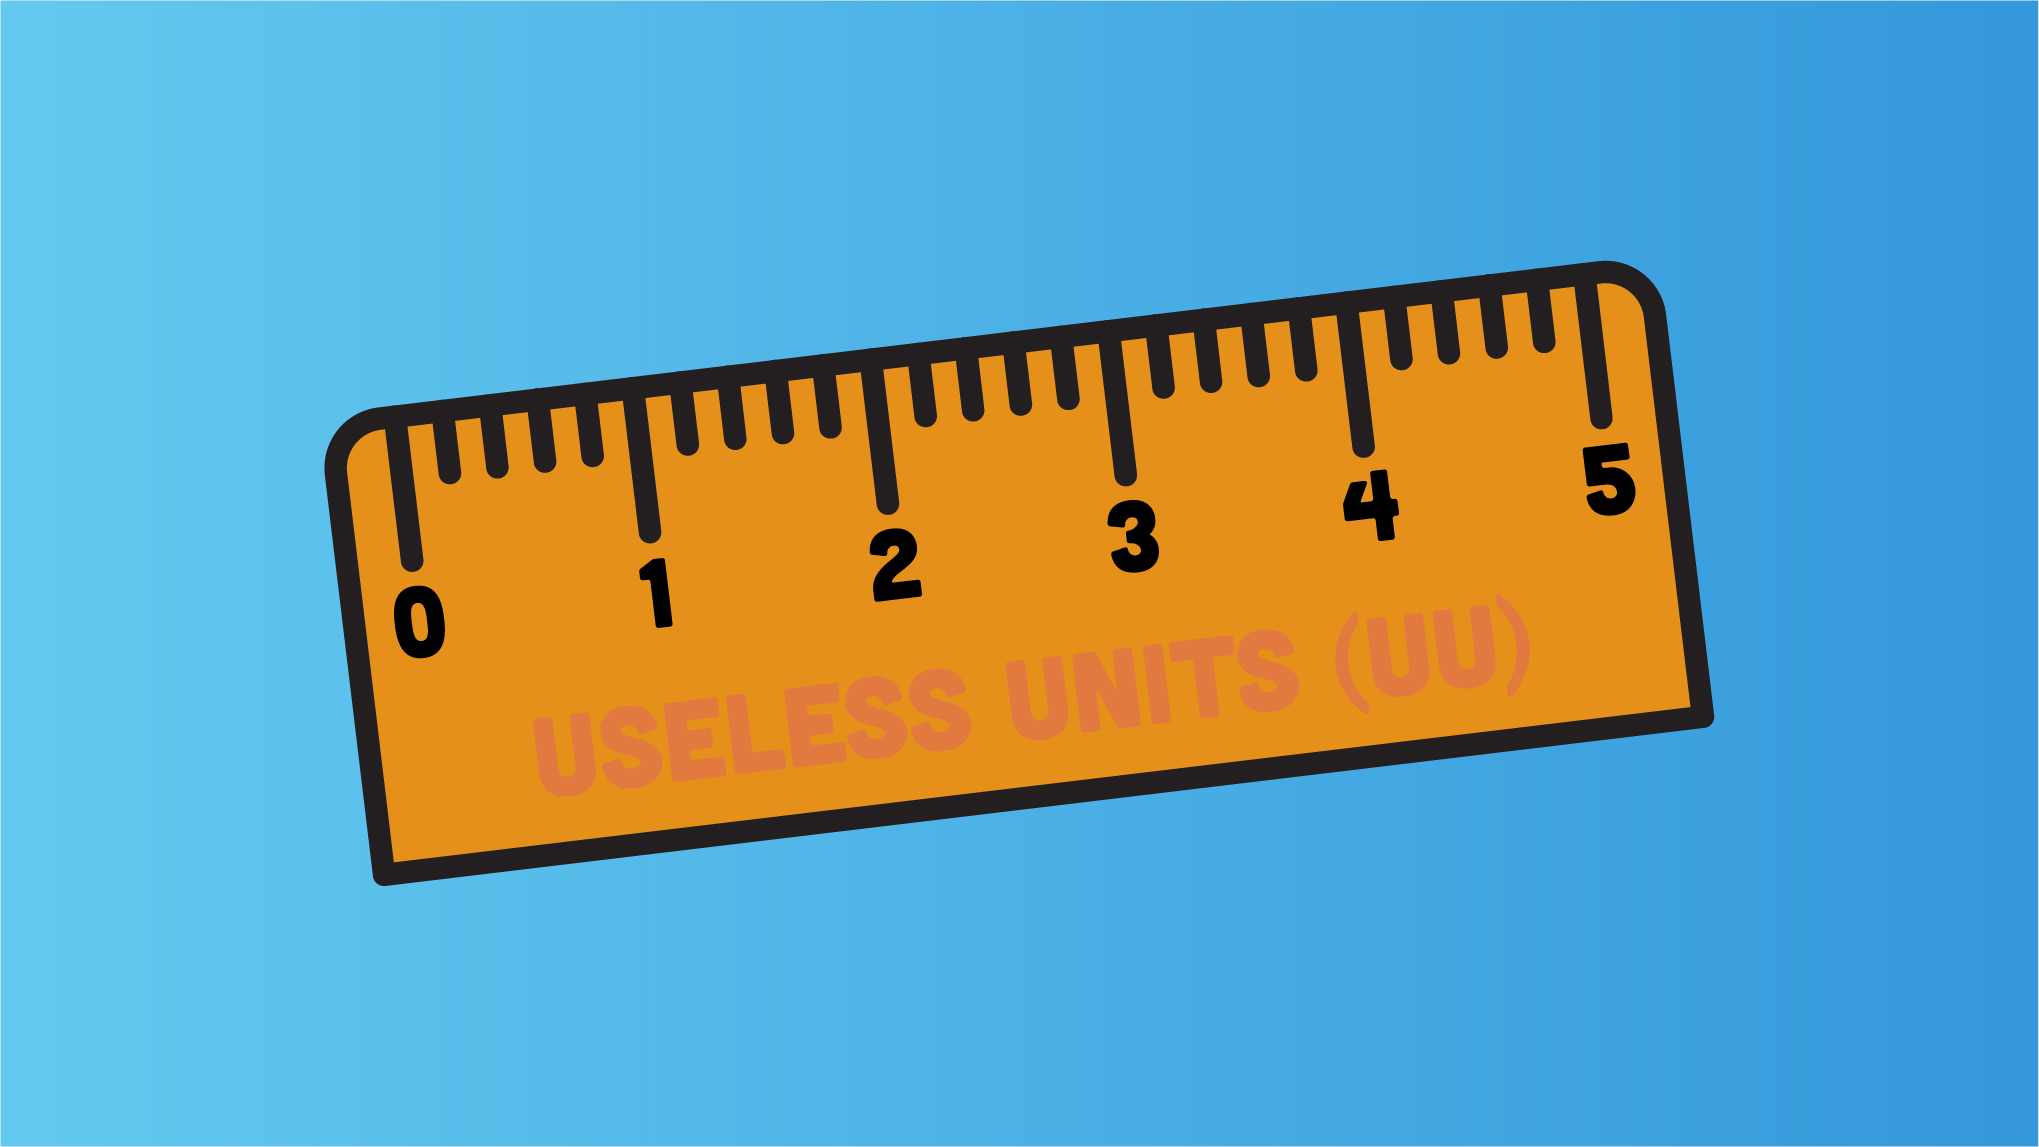 An illustrated ruler marked from 0 to 5 that says Useless Units (UU)